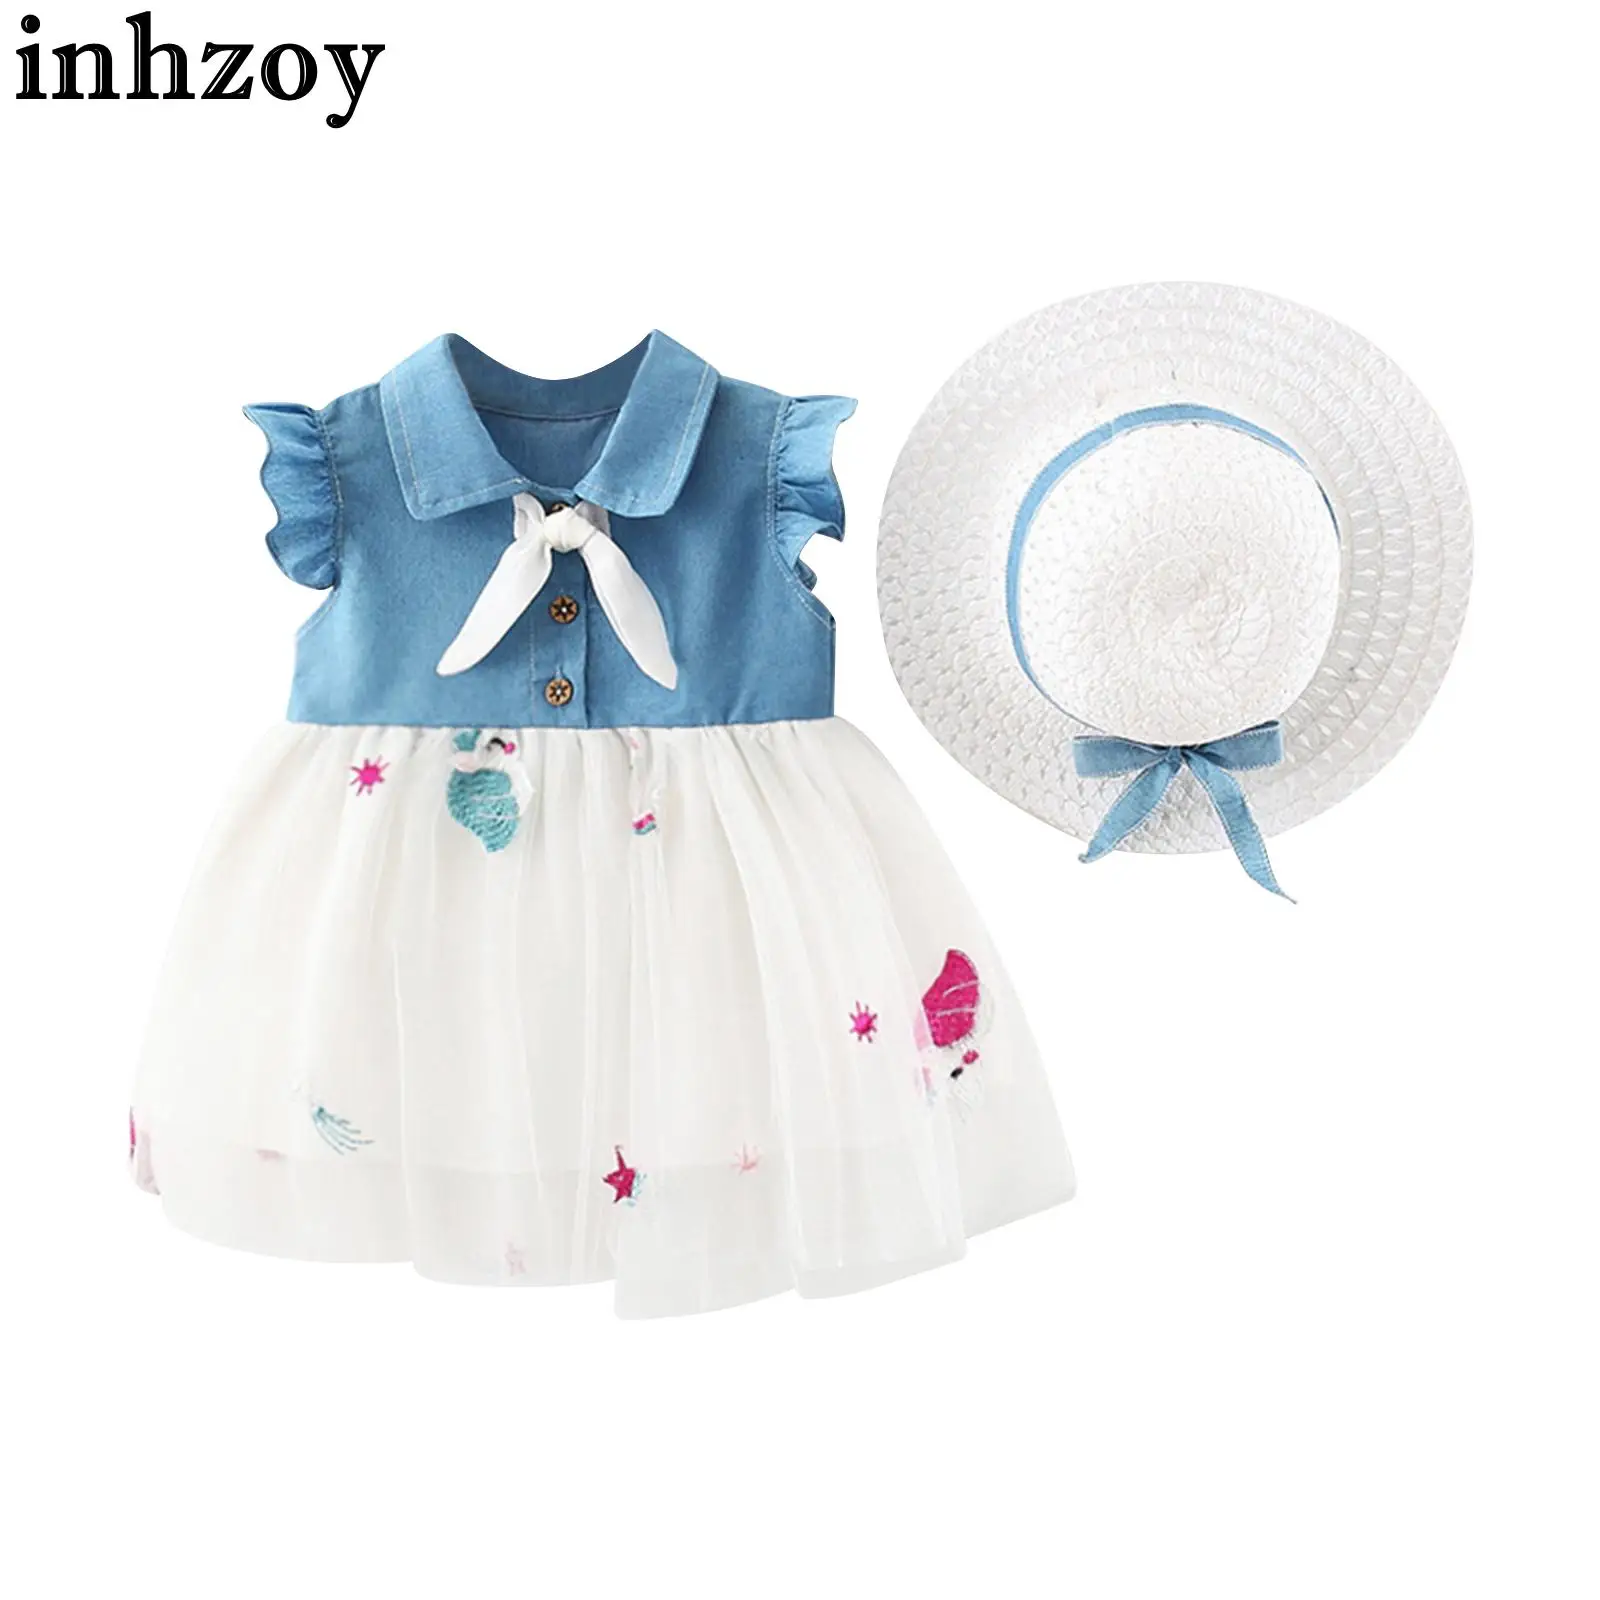 Toddler Baby Girls Tutu Dress Lovely Sweet Bowknot Decor Flying Sleeve Turndown Collar Denim A-line Dress with Hat Summer Outfit